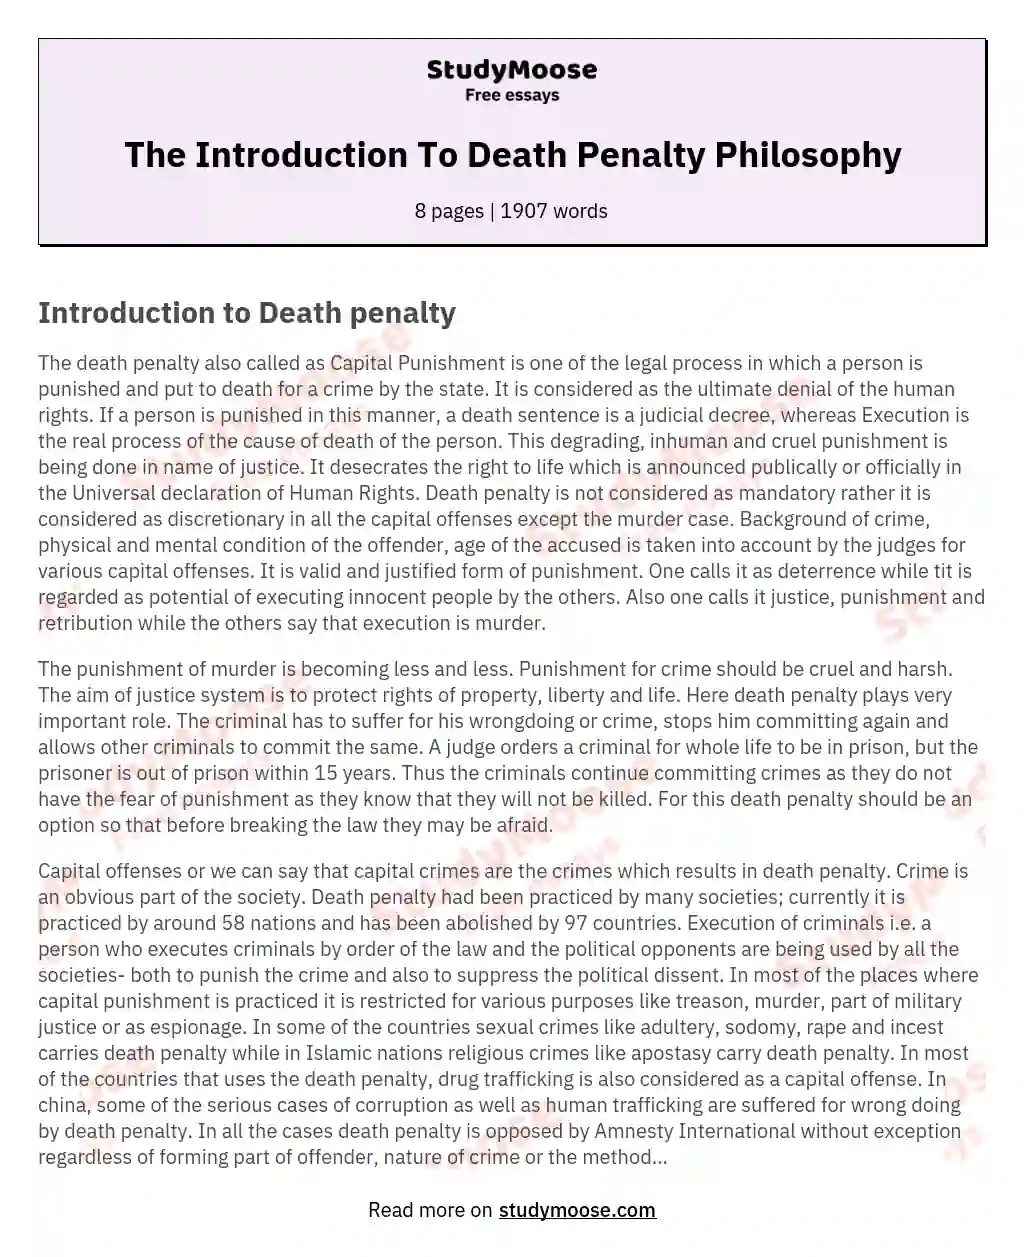 The Introduction To Death Penalty Philosophy